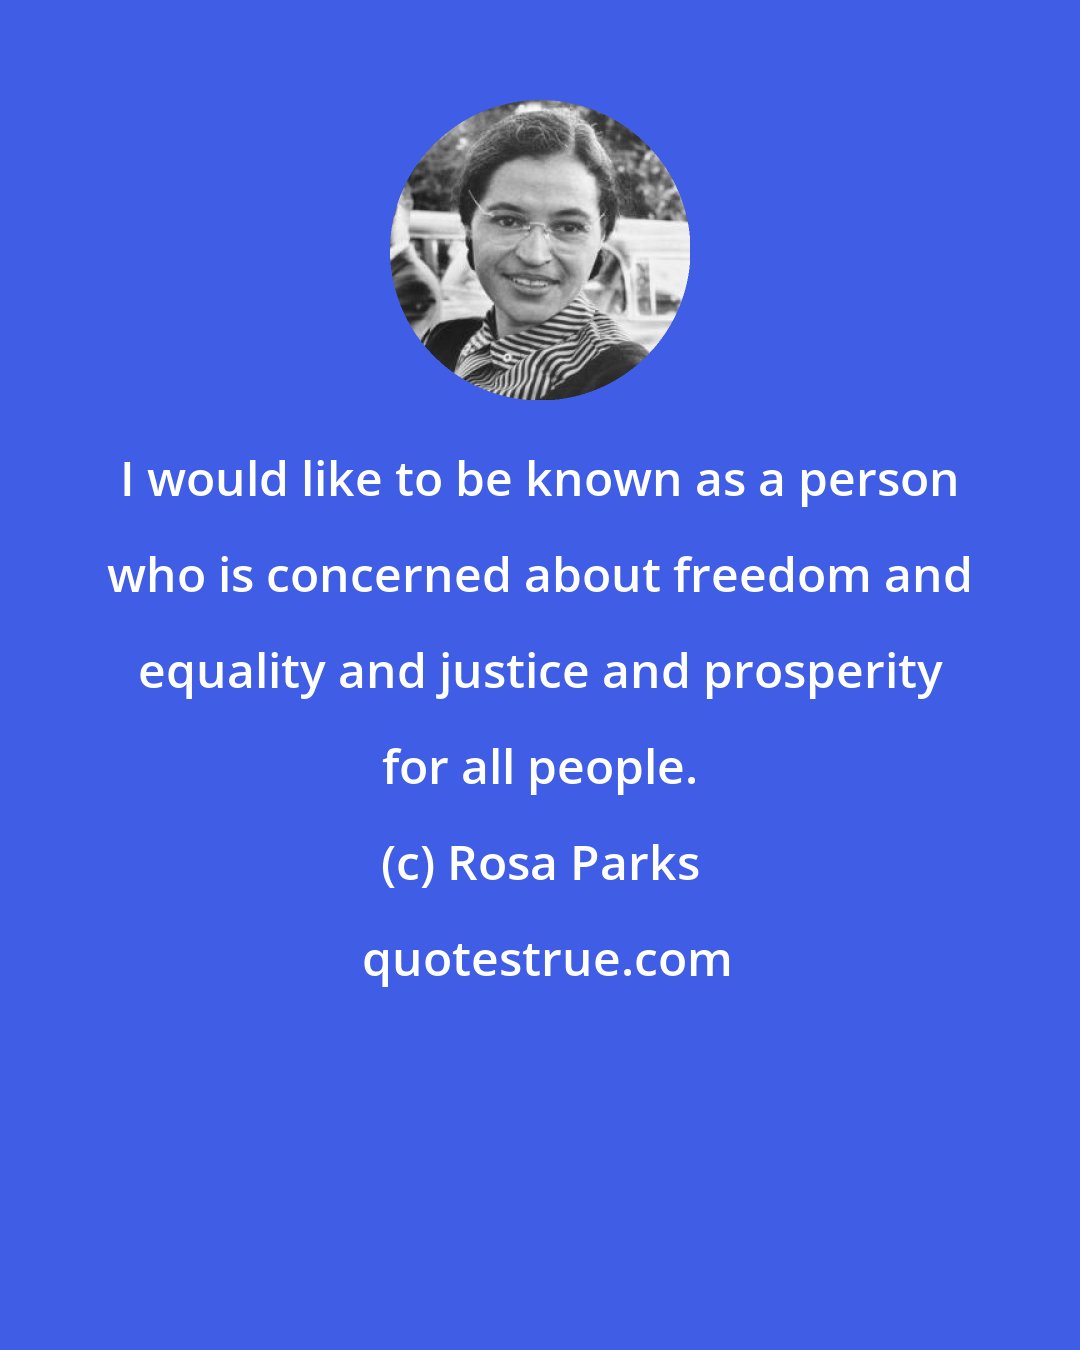 Rosa Parks: I would like to be known as a person who is concerned about freedom and equality and justice and prosperity for all people.